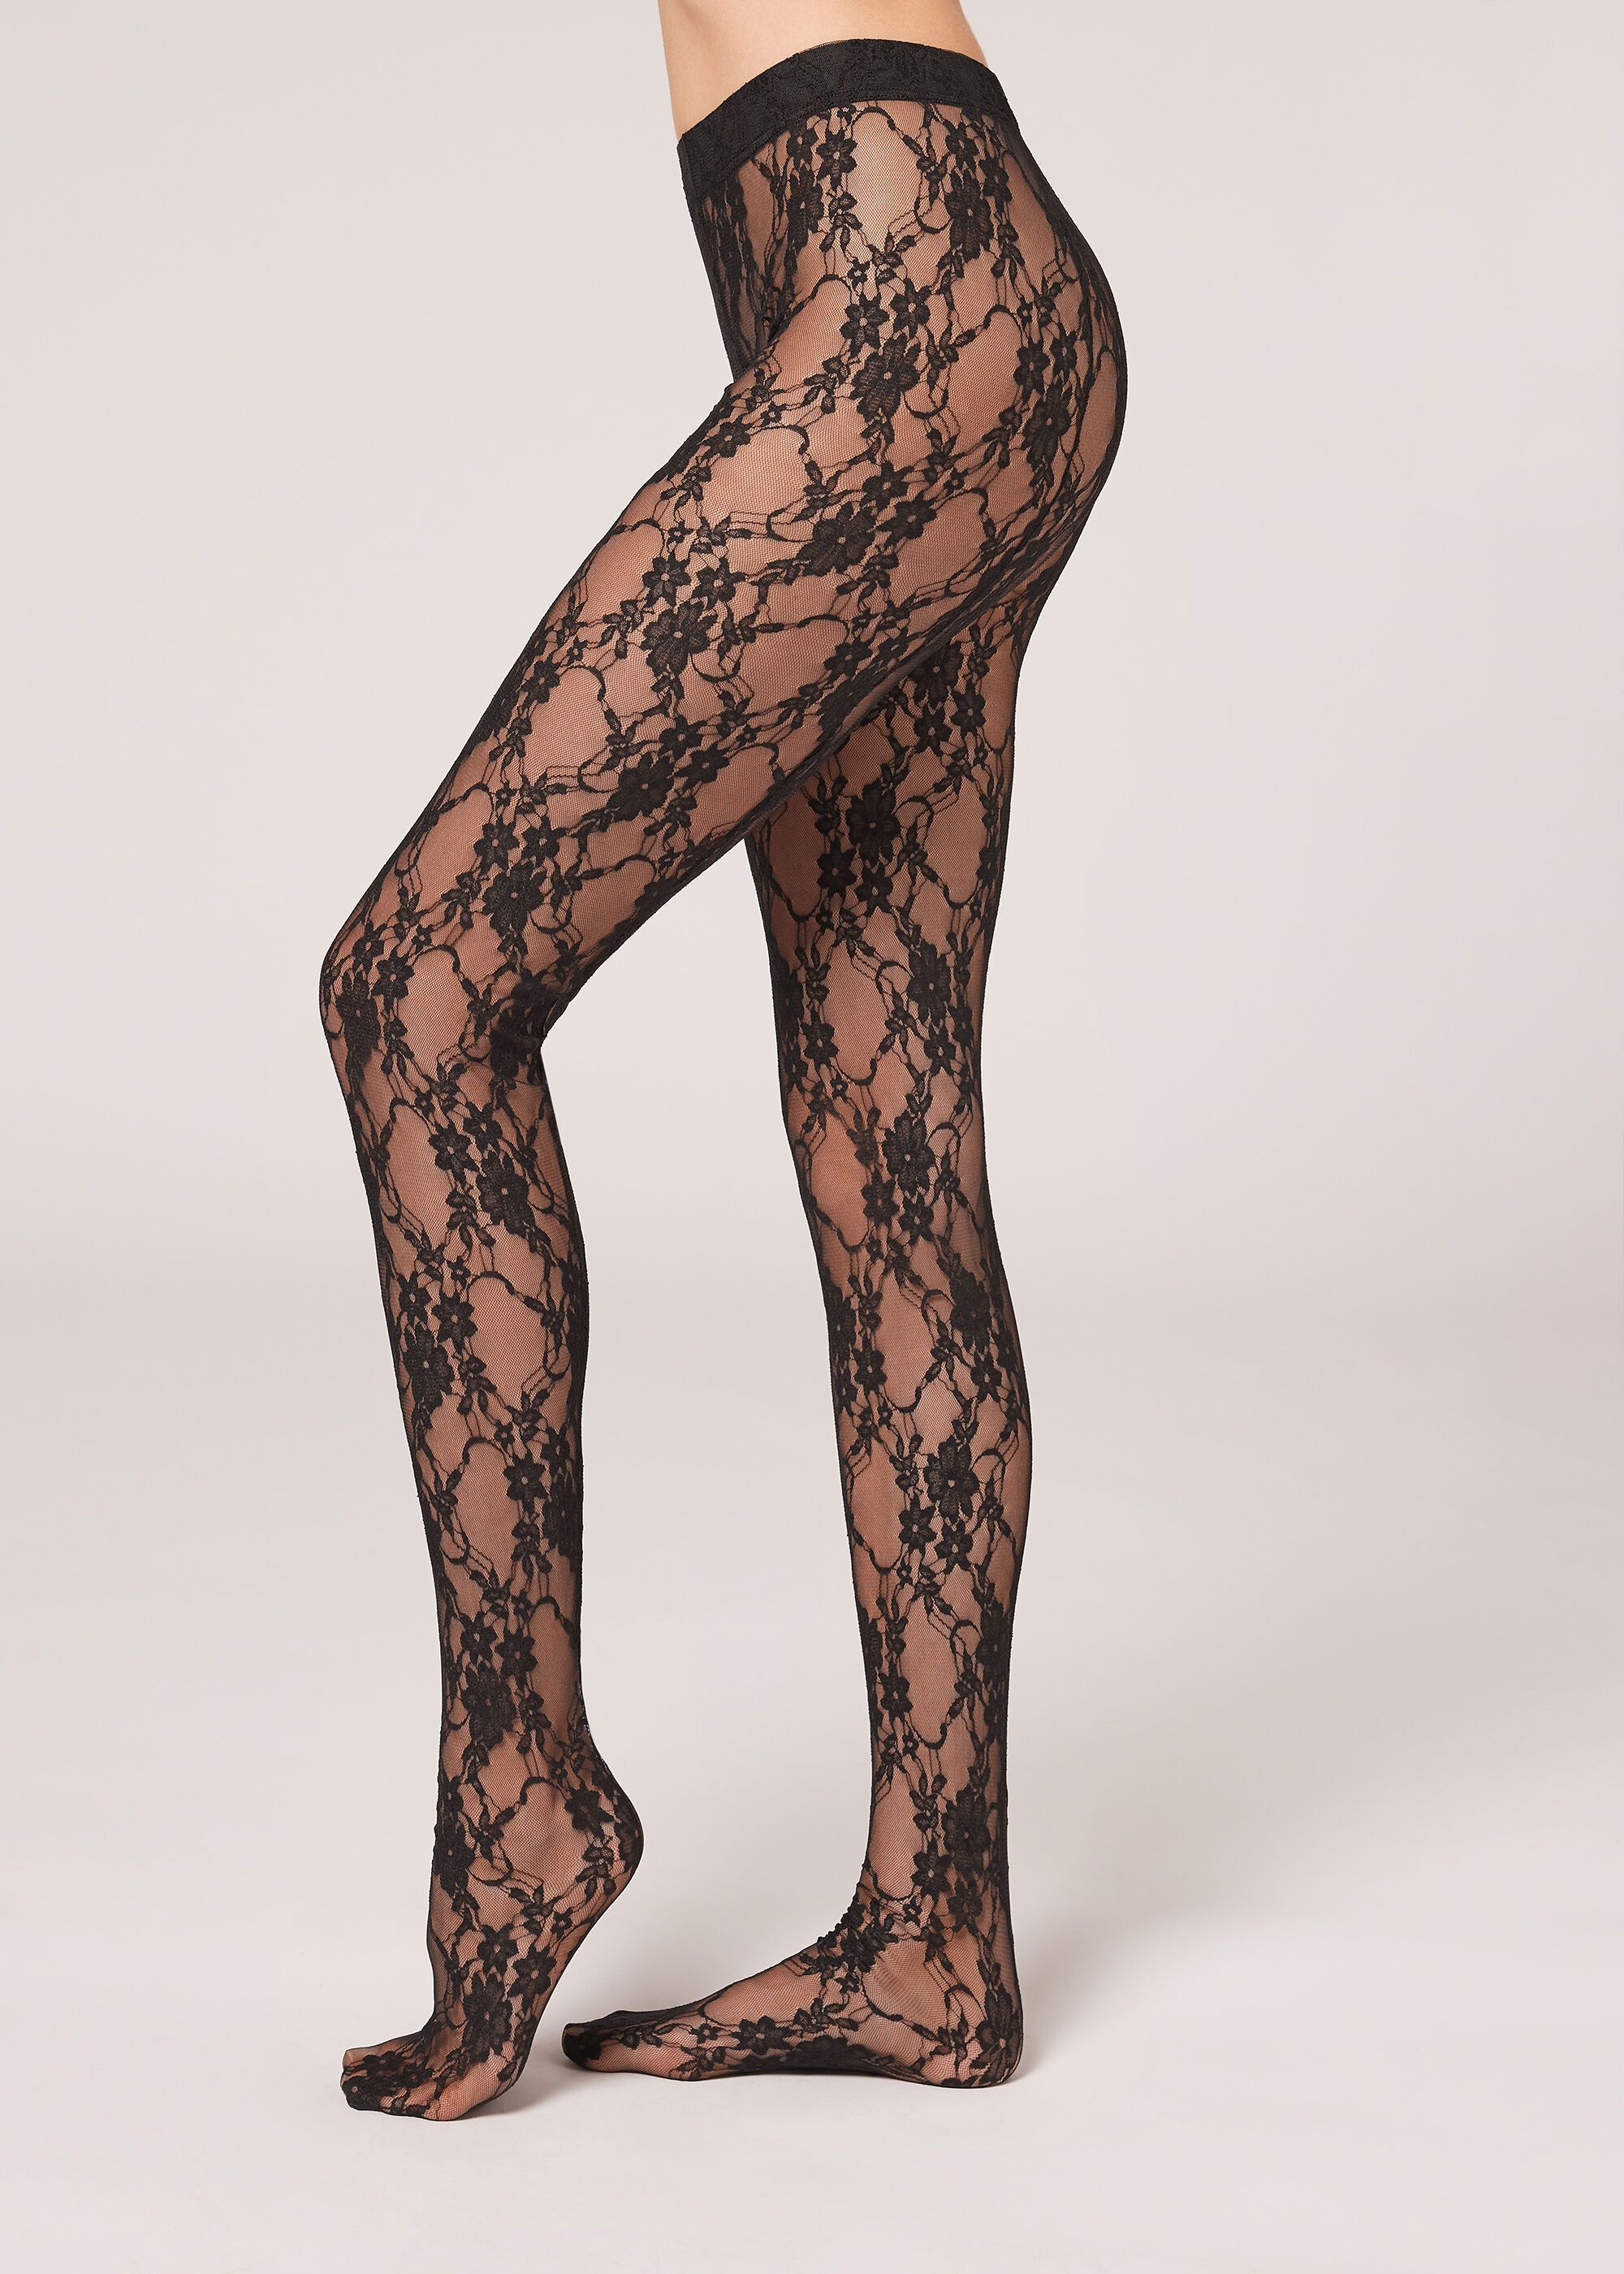 Floral Lace Fabric Tights | Calzedonia US